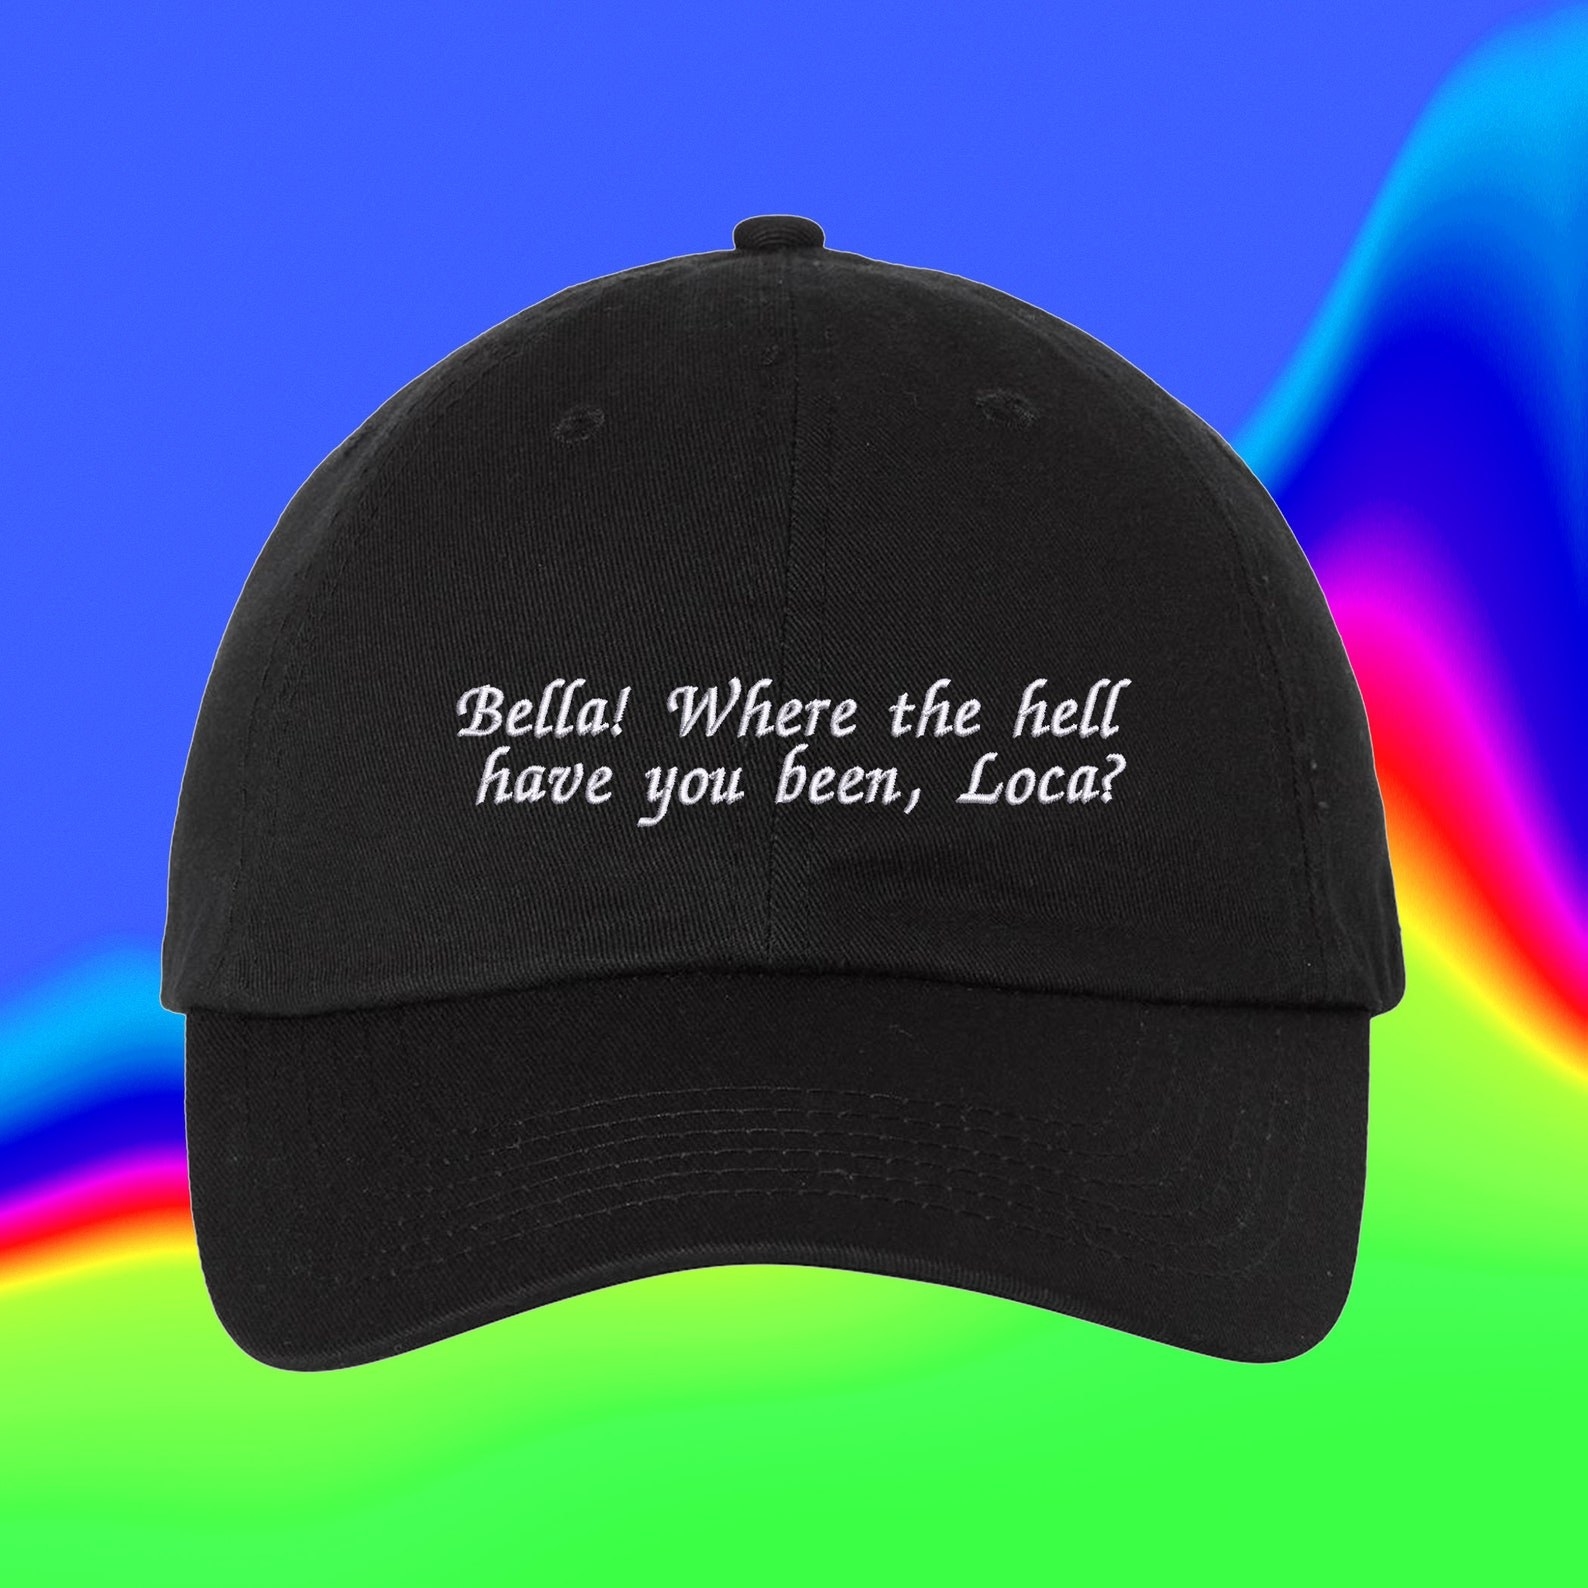 a black baseball cap that says &quot;bella! where the hell have you been, loca?&quot; in white embroidery